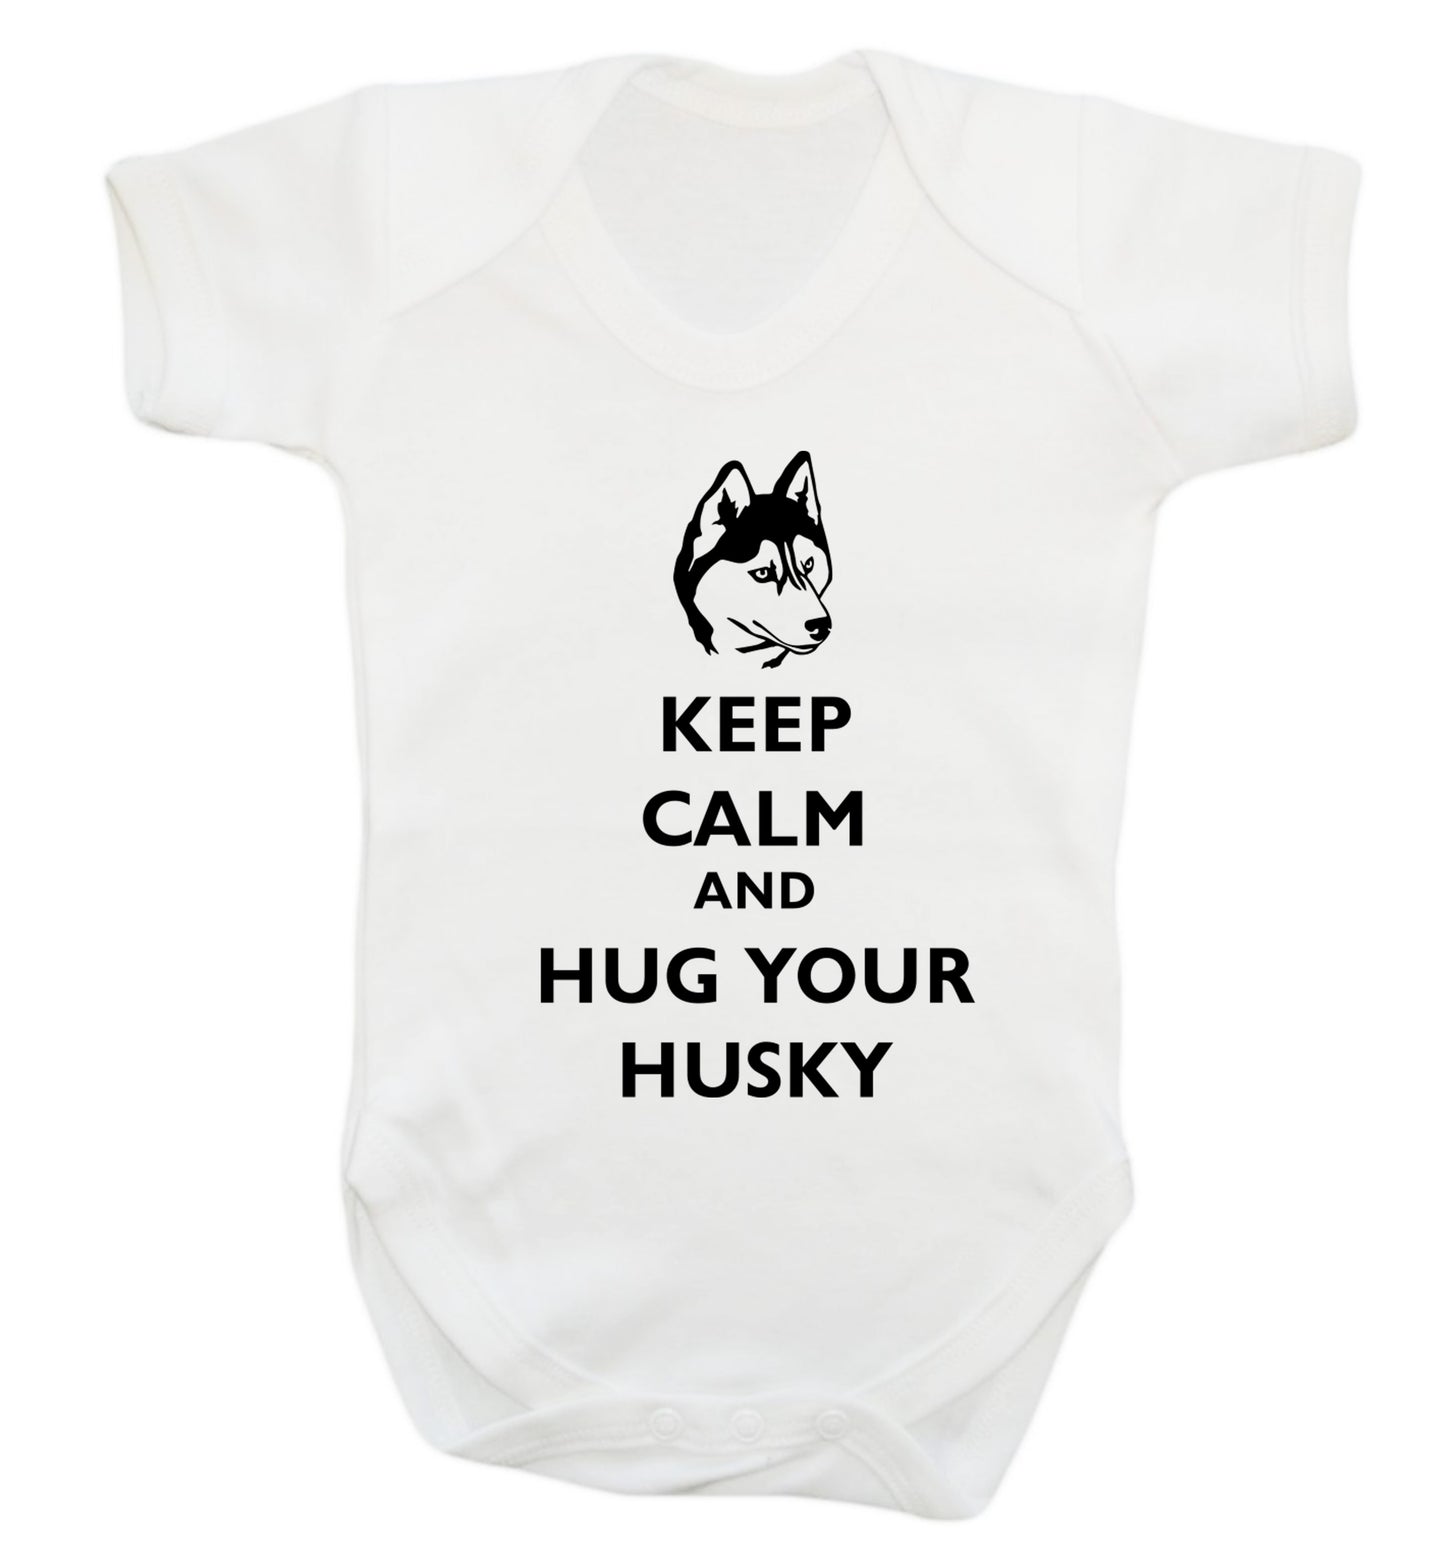 Keep calm and hug your husky Baby Vest white 18-24 months